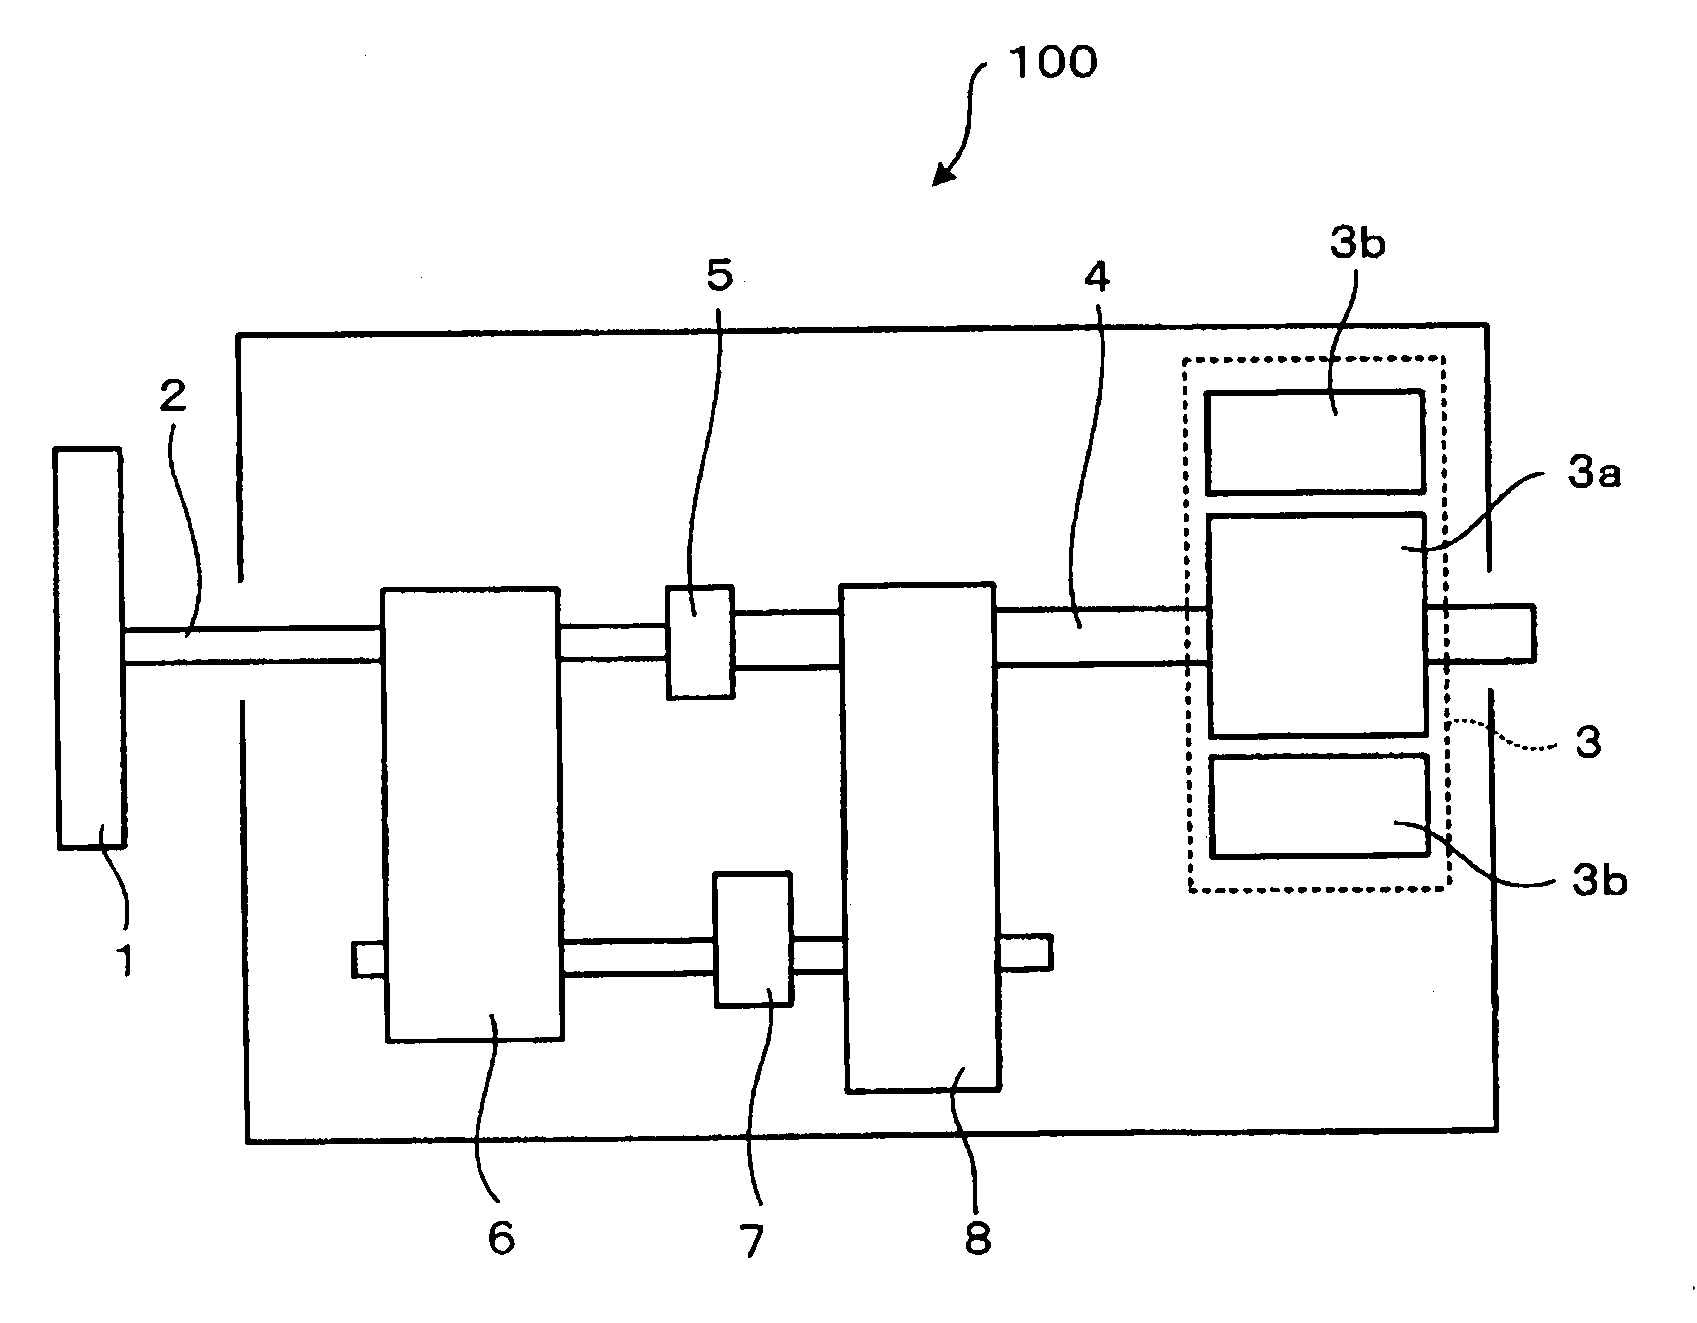 Electric power generation device